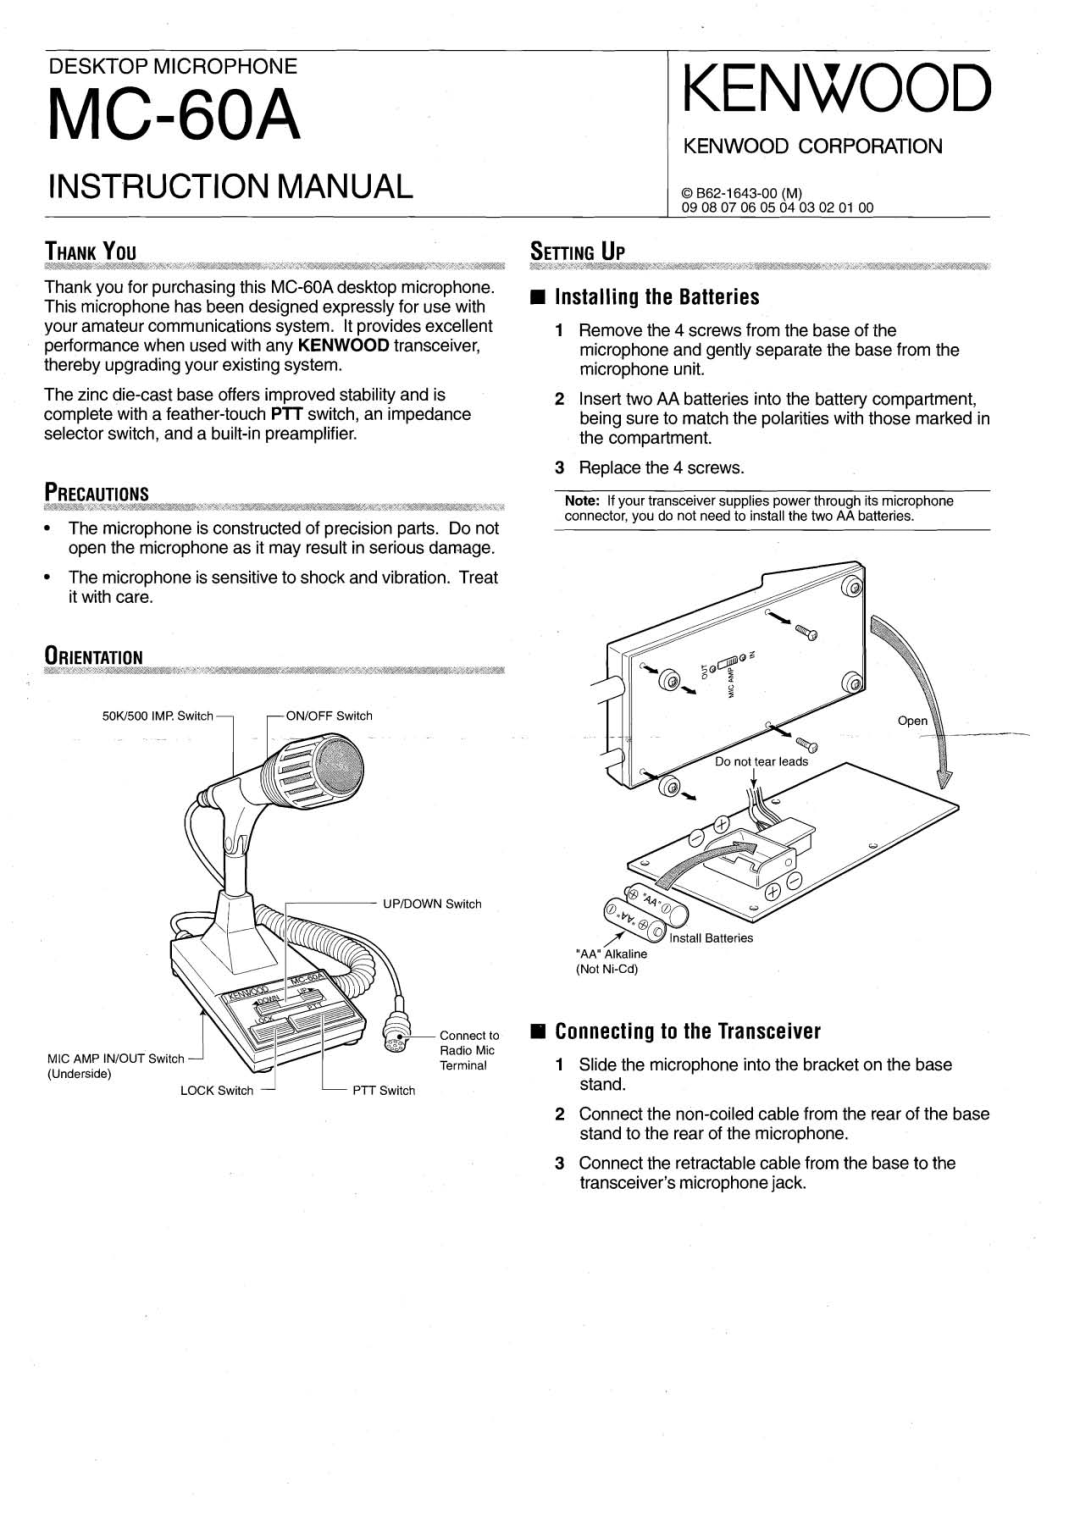 Kenwood MC-60A instruction manual Installing the Batteries, Il Connecting to the Transceiver, Kenwood, Instructionmanual 